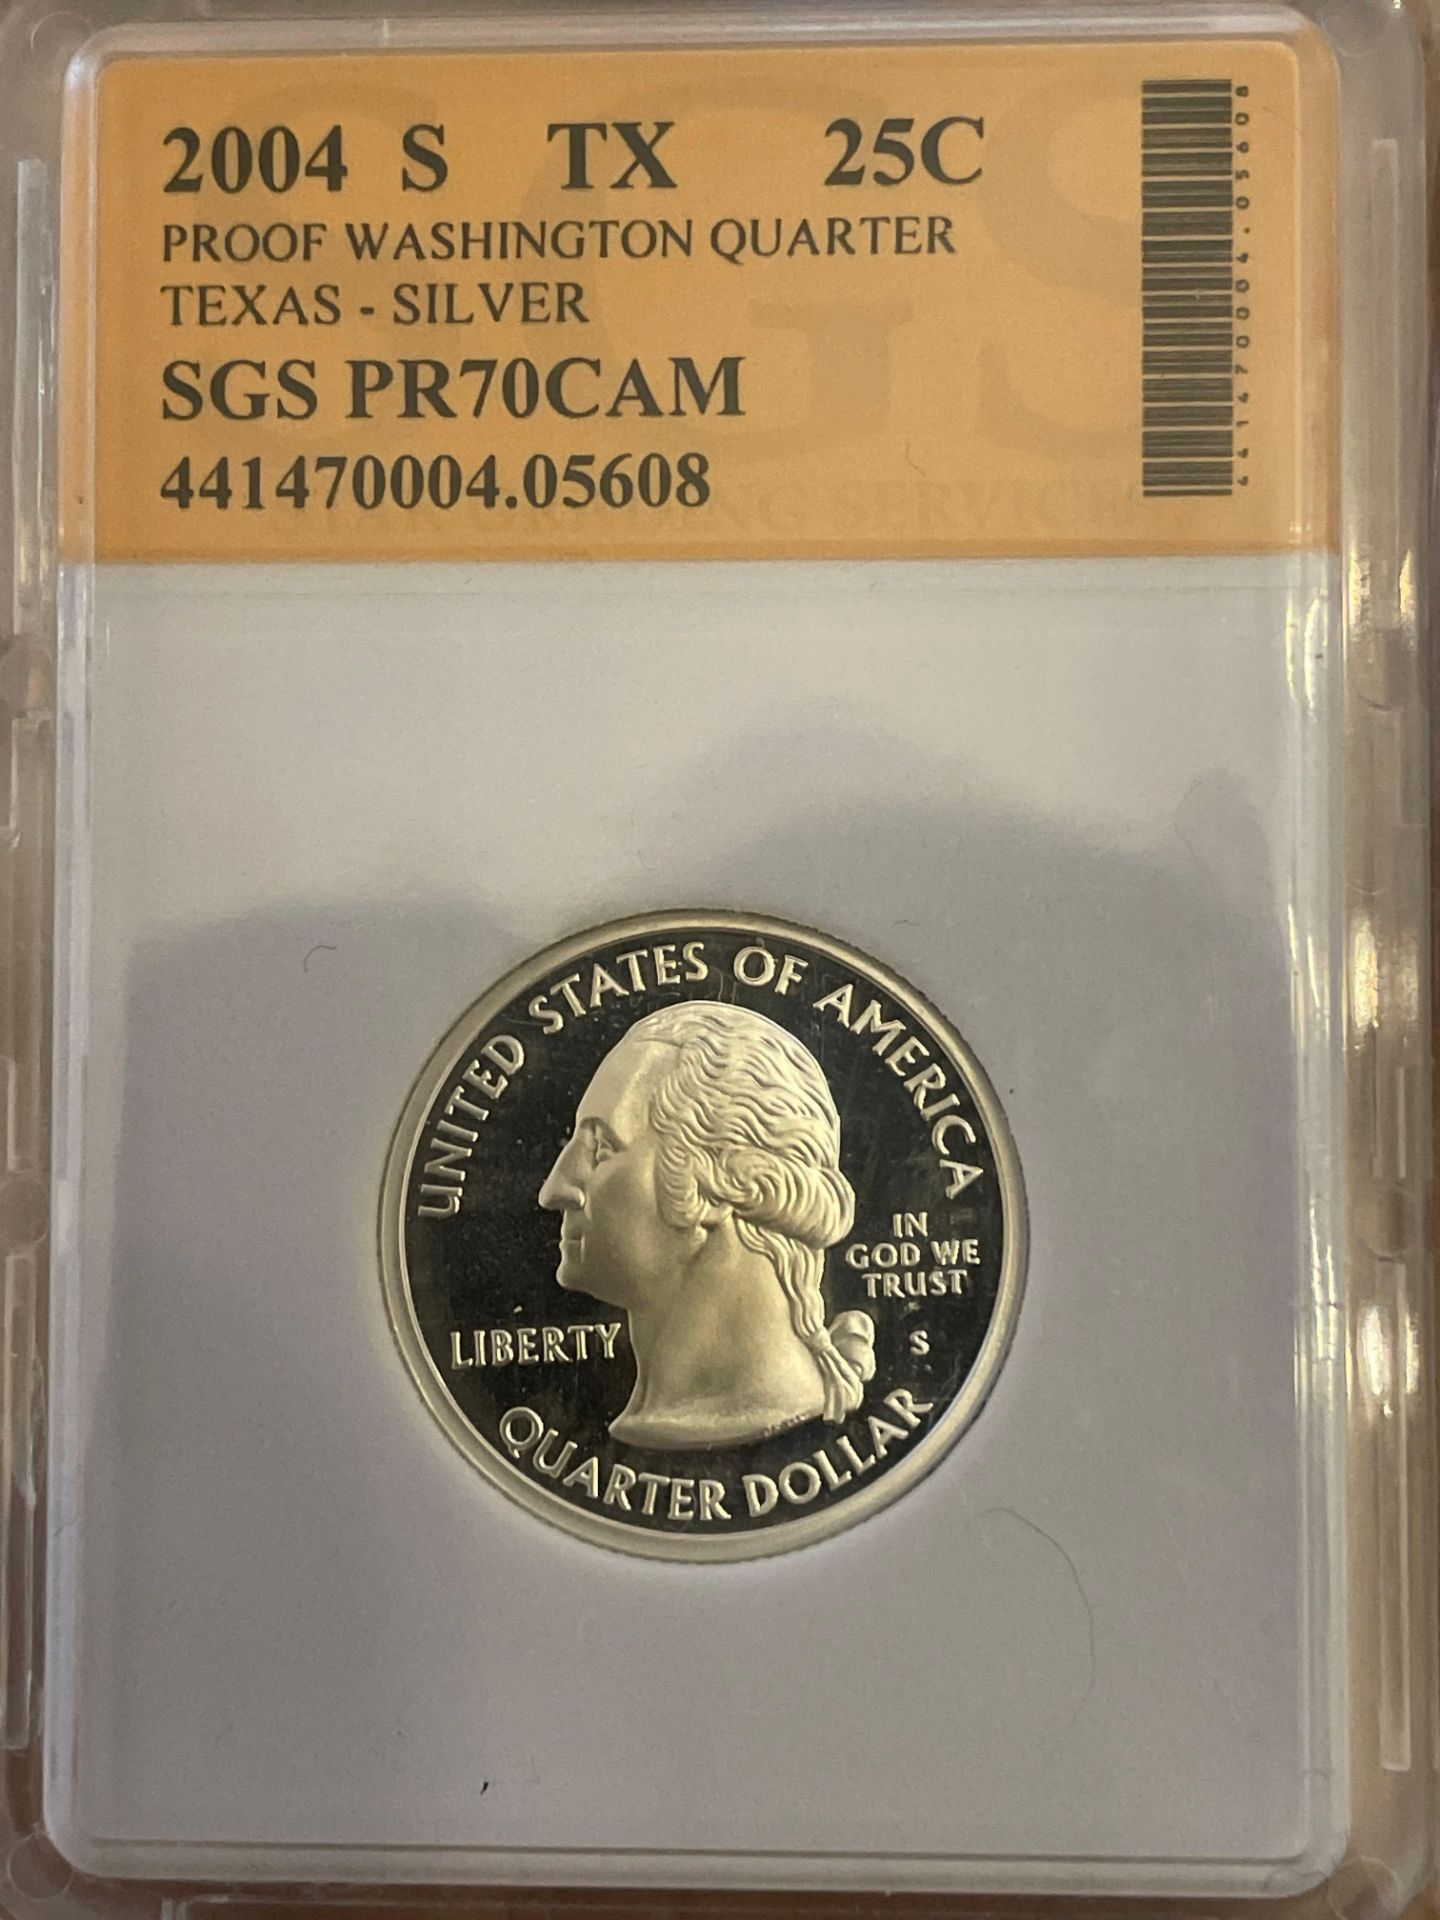 Graded Quarters and more